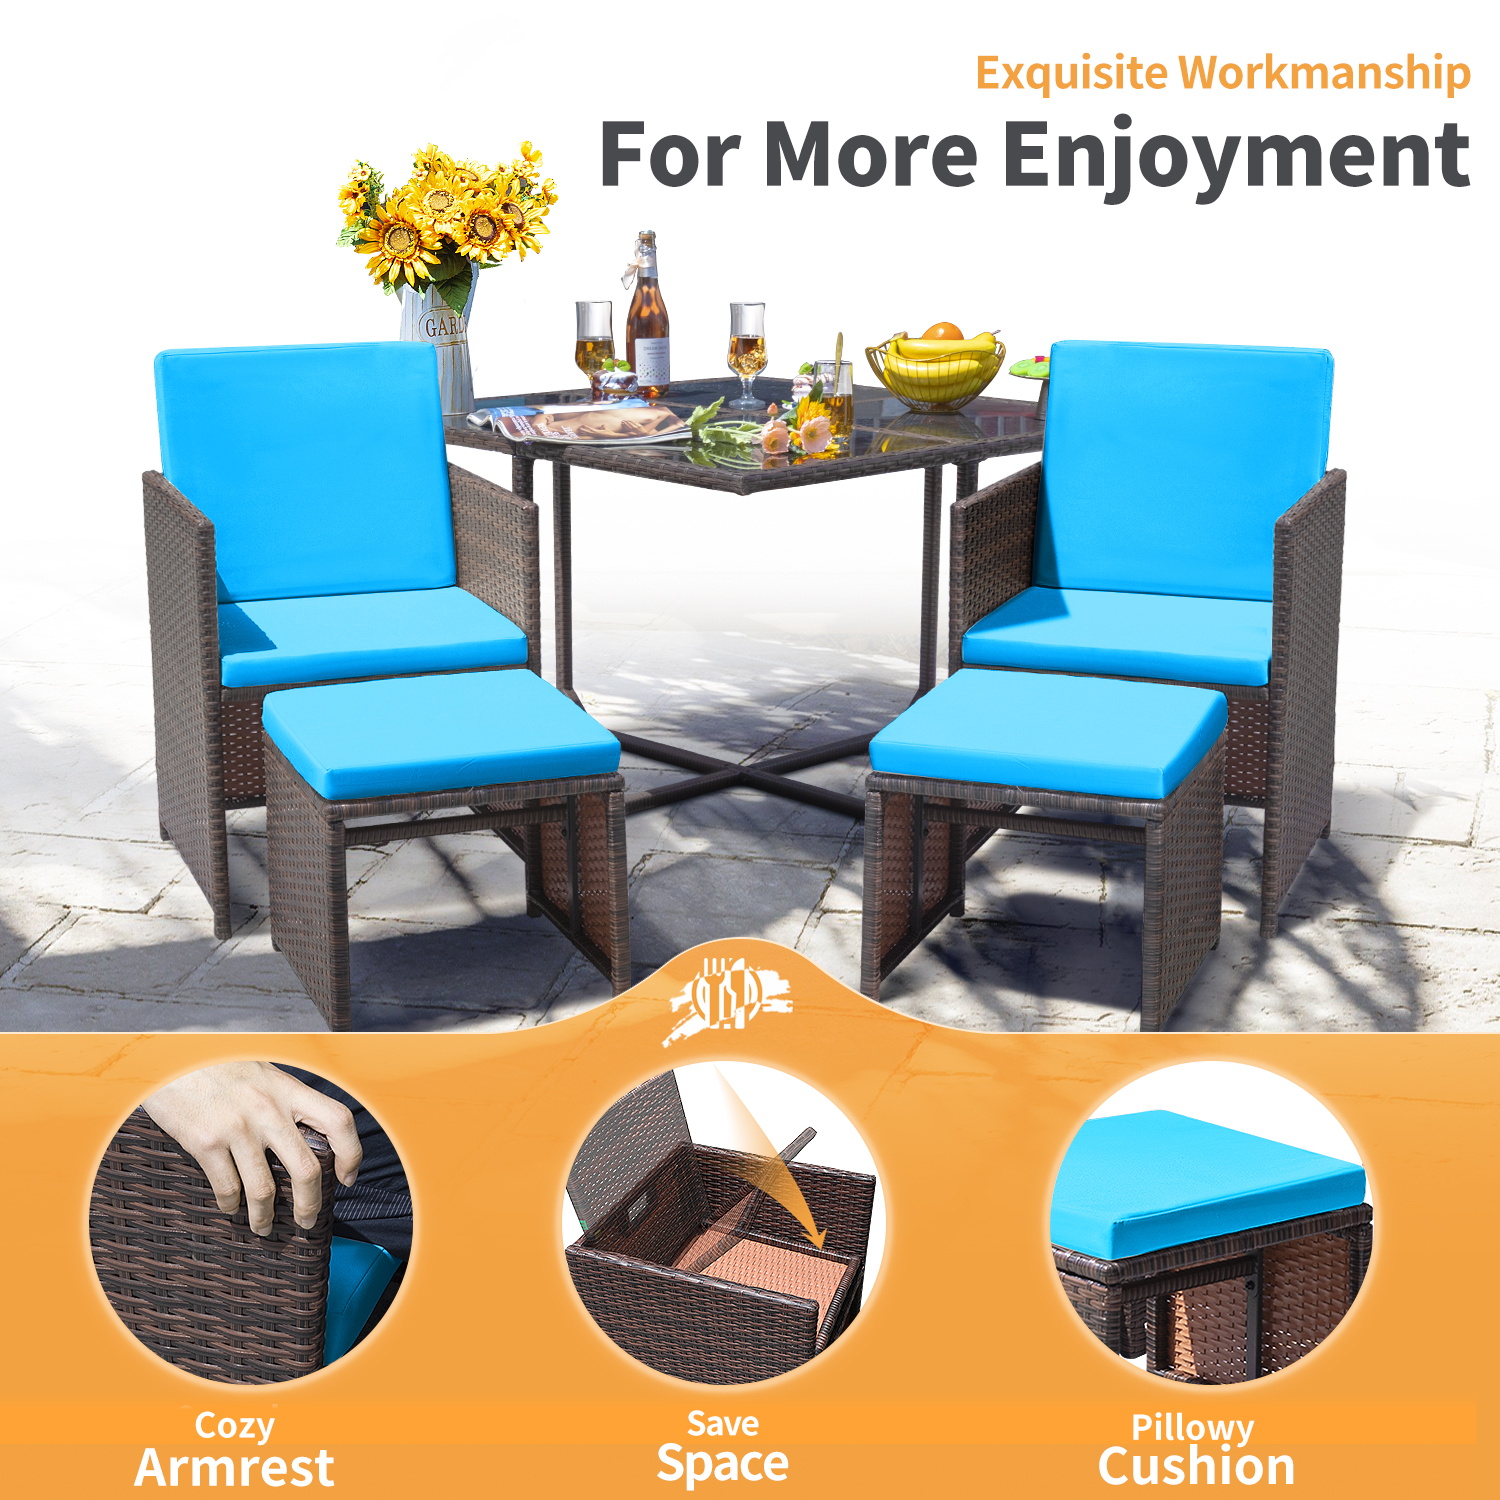 Lacoo 9 Pieces Patio Indoor Dining Sets Outdoor Furniture Patio Wicker Rattan Chairs and Tempered Glass Table Sectional Set Conversation Set Cushioned with Ottoman, Blue, 8 - image 5 of 7